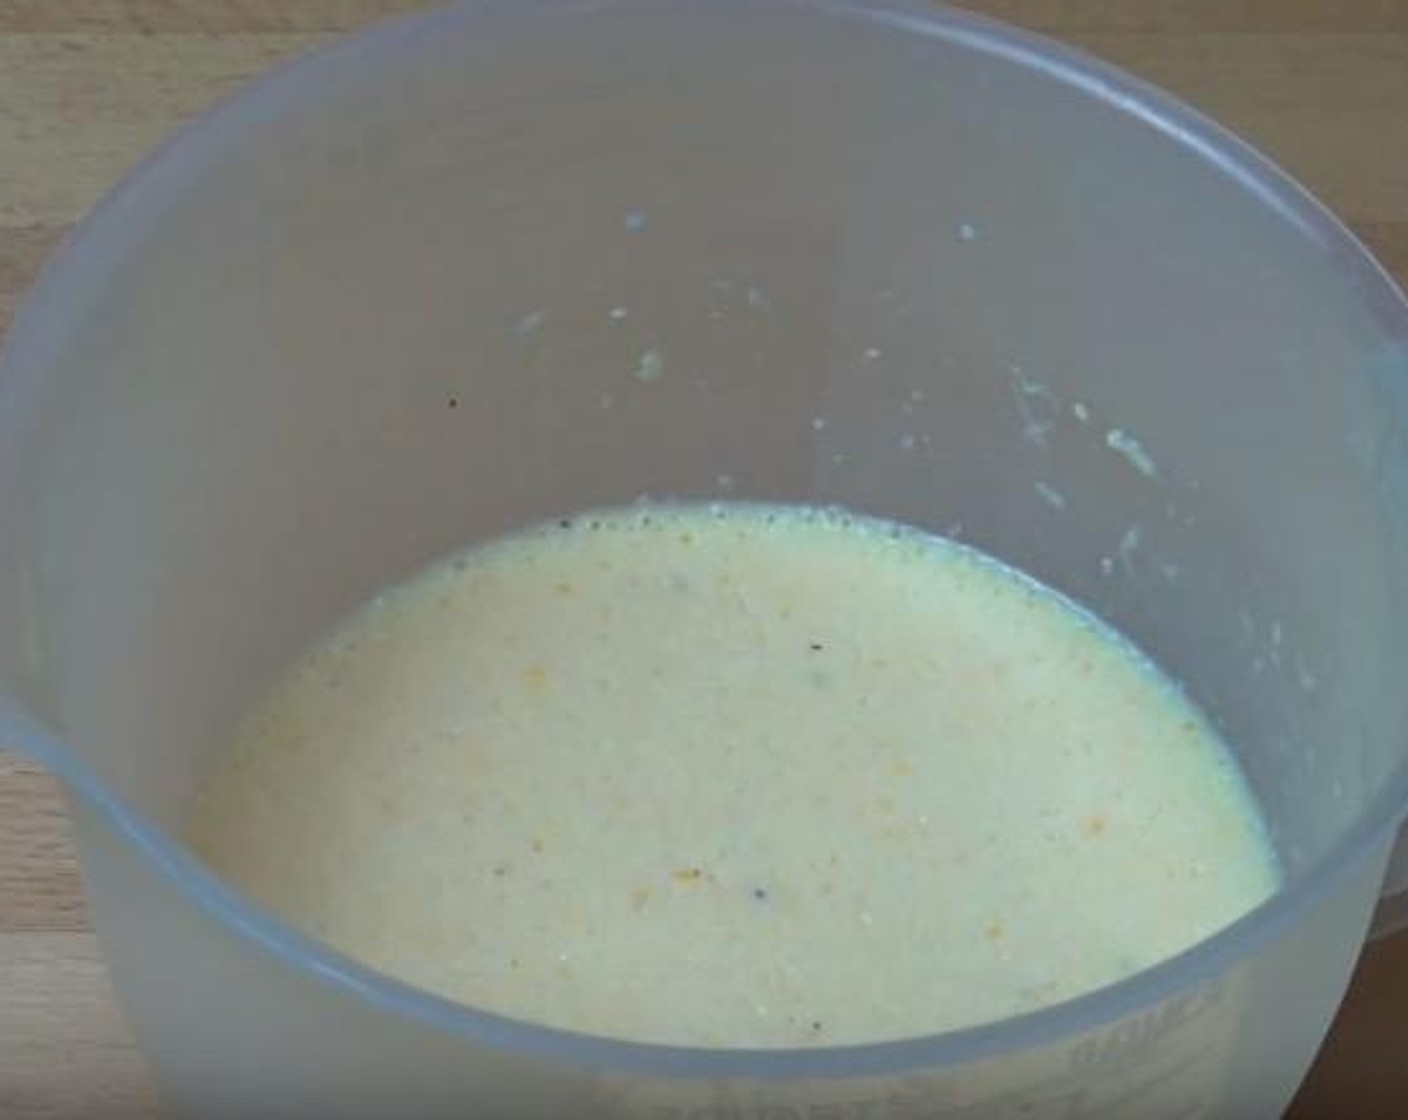 step 1 In a mixing jug, add Eggs (3), Milk (1 cup), Salt (to taste), Ground Black Pepper (to taste), and Parmesan Cheese (1/2 cup). Using a whisk, mix together.